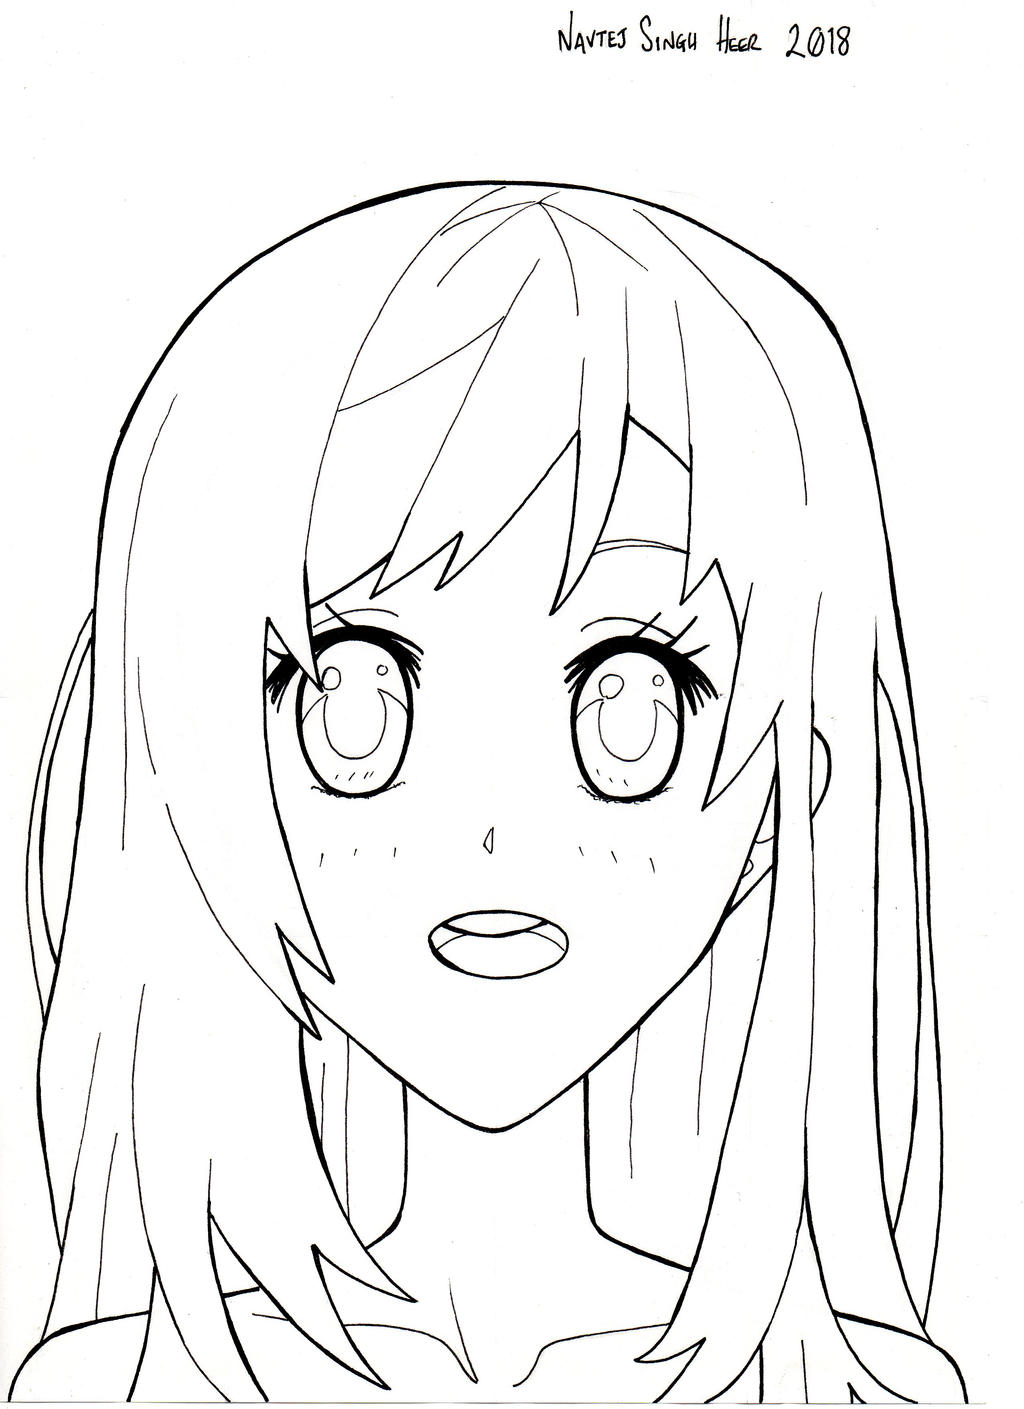 Lineart - Anime Style_Not Fanart on color-me-club - DeviantArt